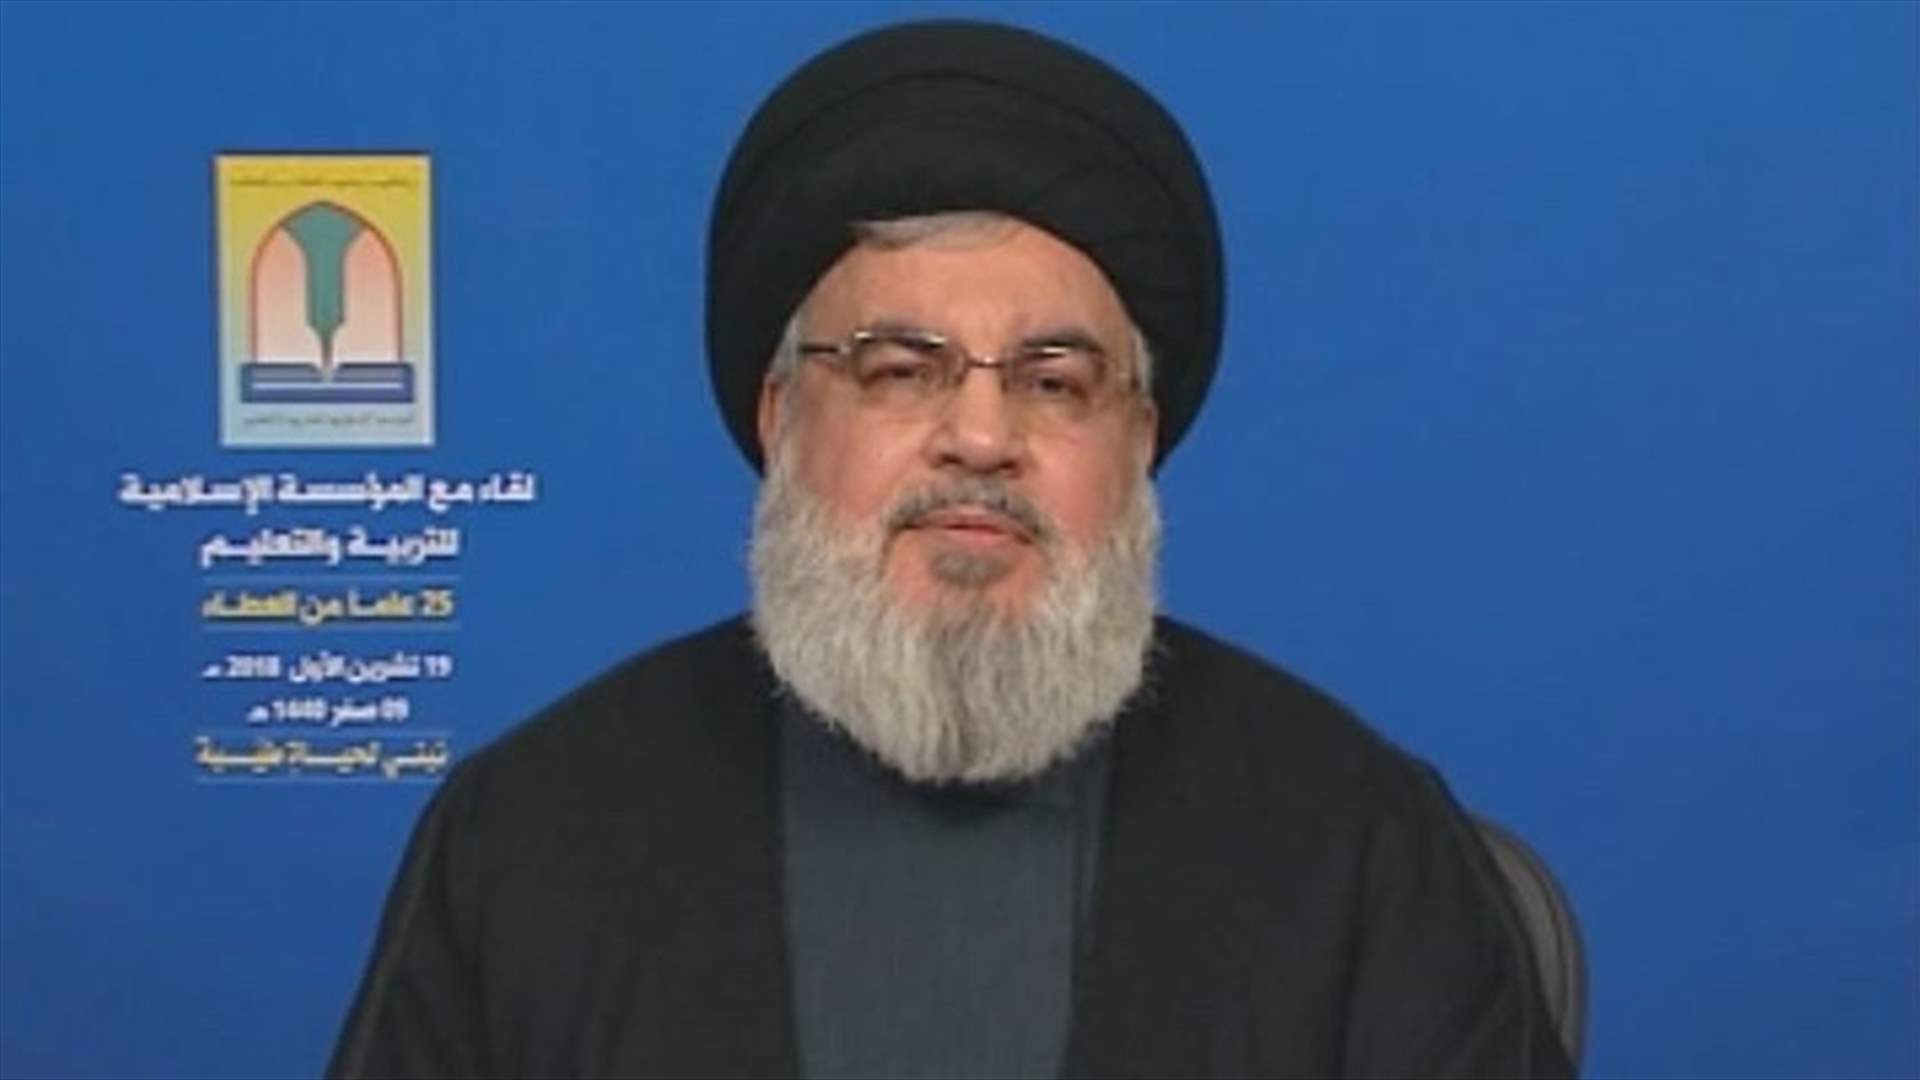 Sayyed Nasrallah says significant progress made in cabinet formation process